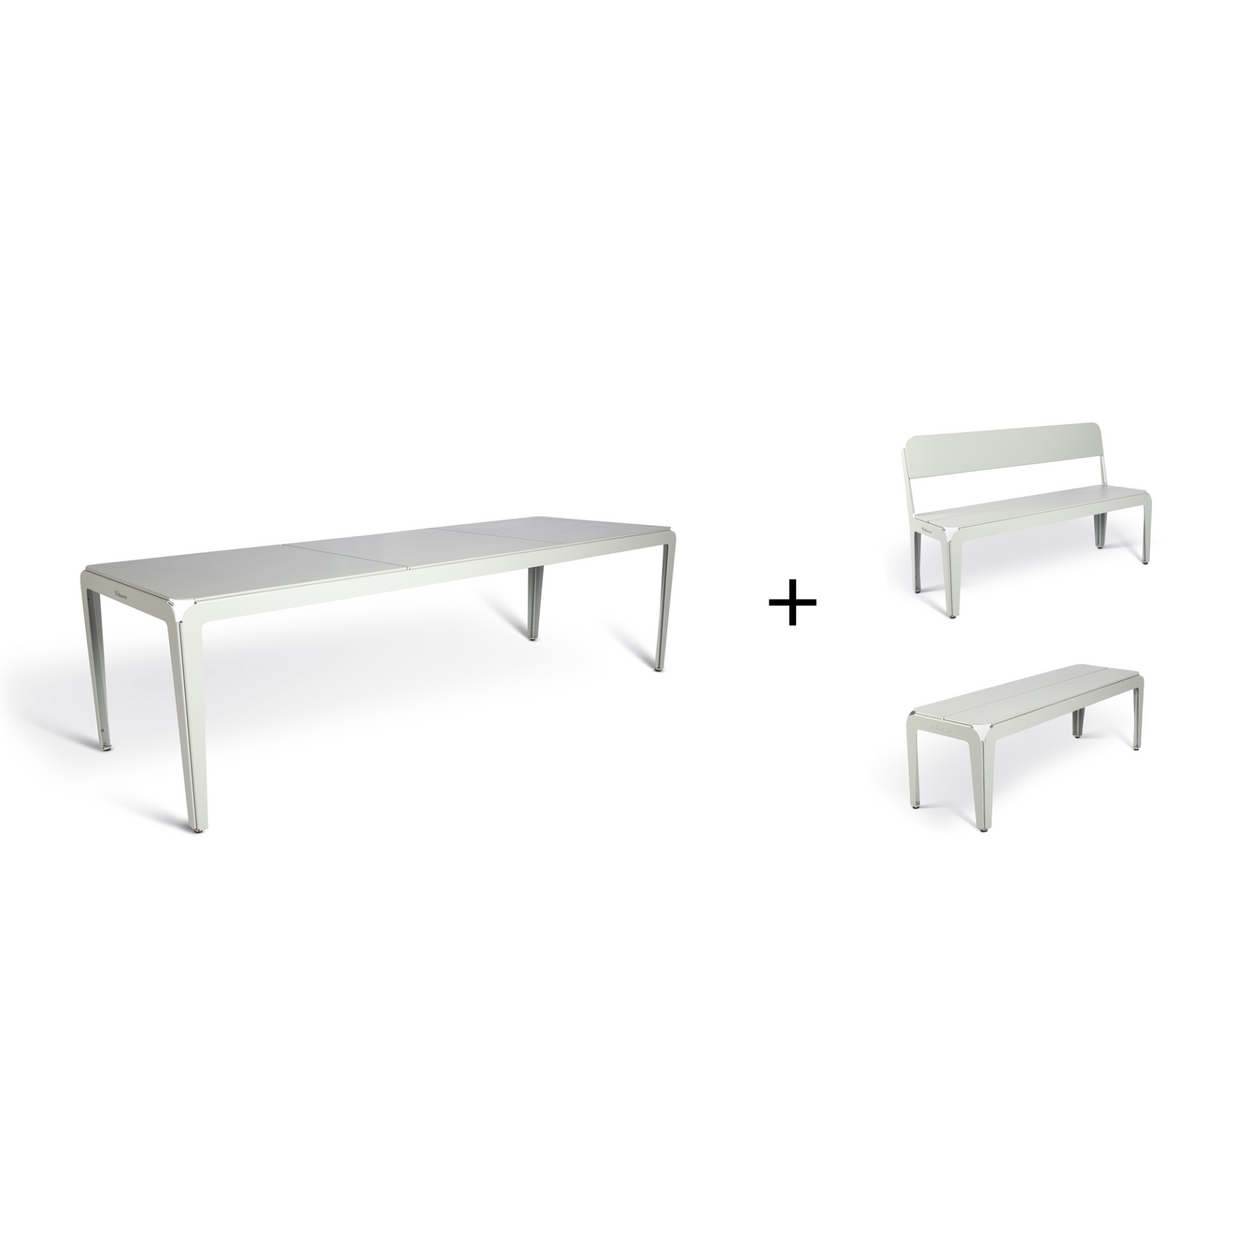 Bended table 270 inclusief benches - 3 combinaties